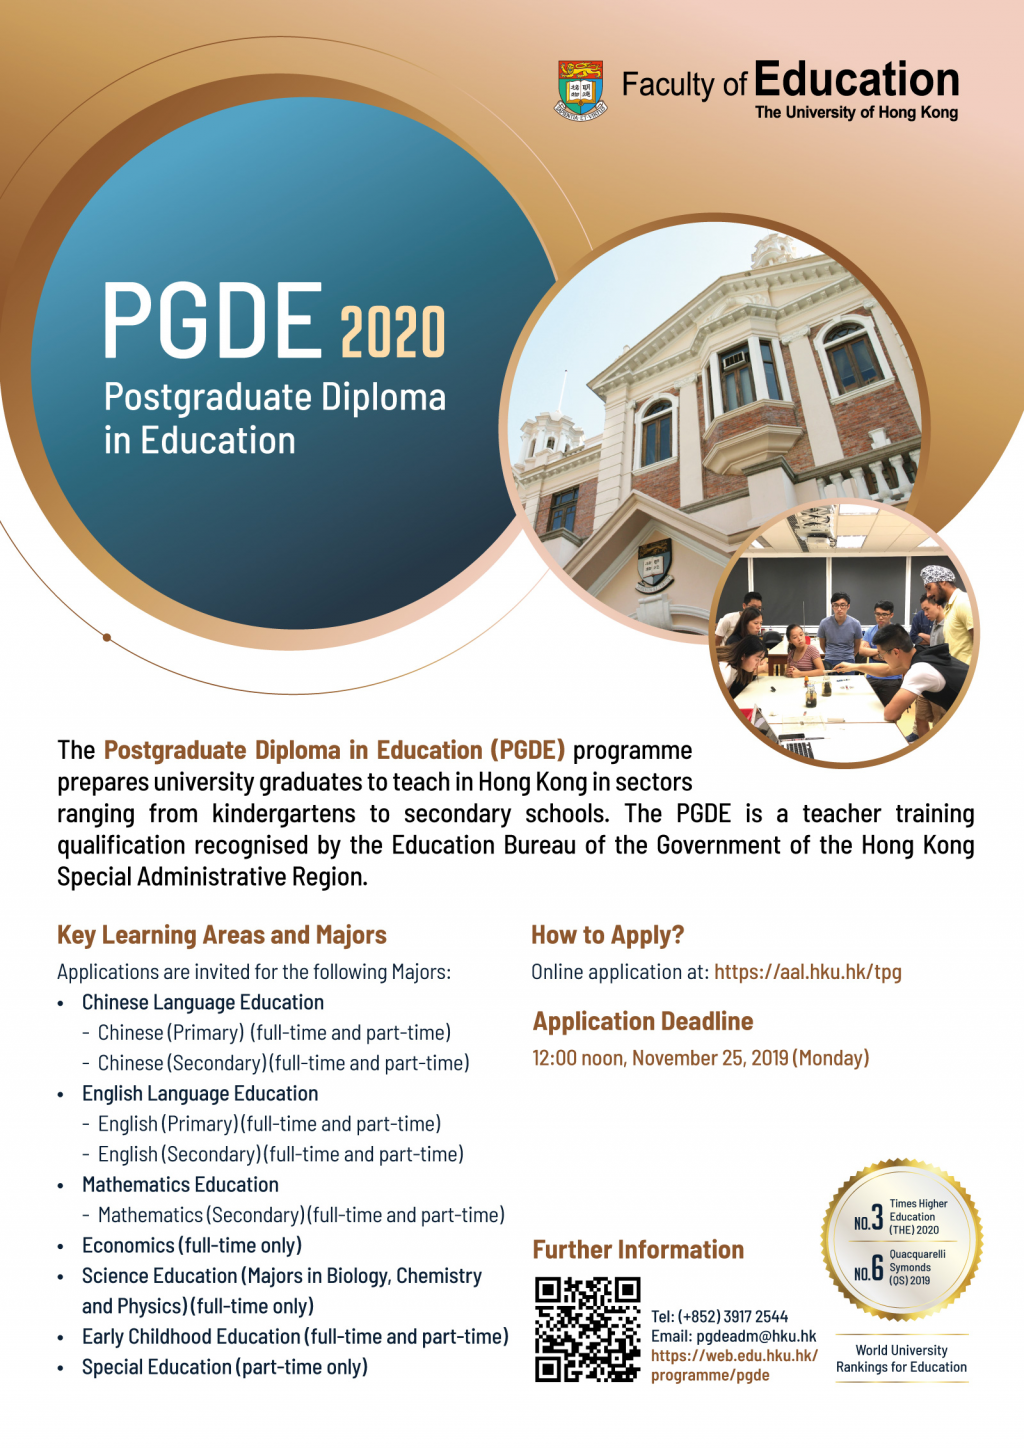 PGDE 2020 intake - the Part-time Early Childhood Education major has extended the application deadline to 12 noon, Jan 3, 2020 (Friday).